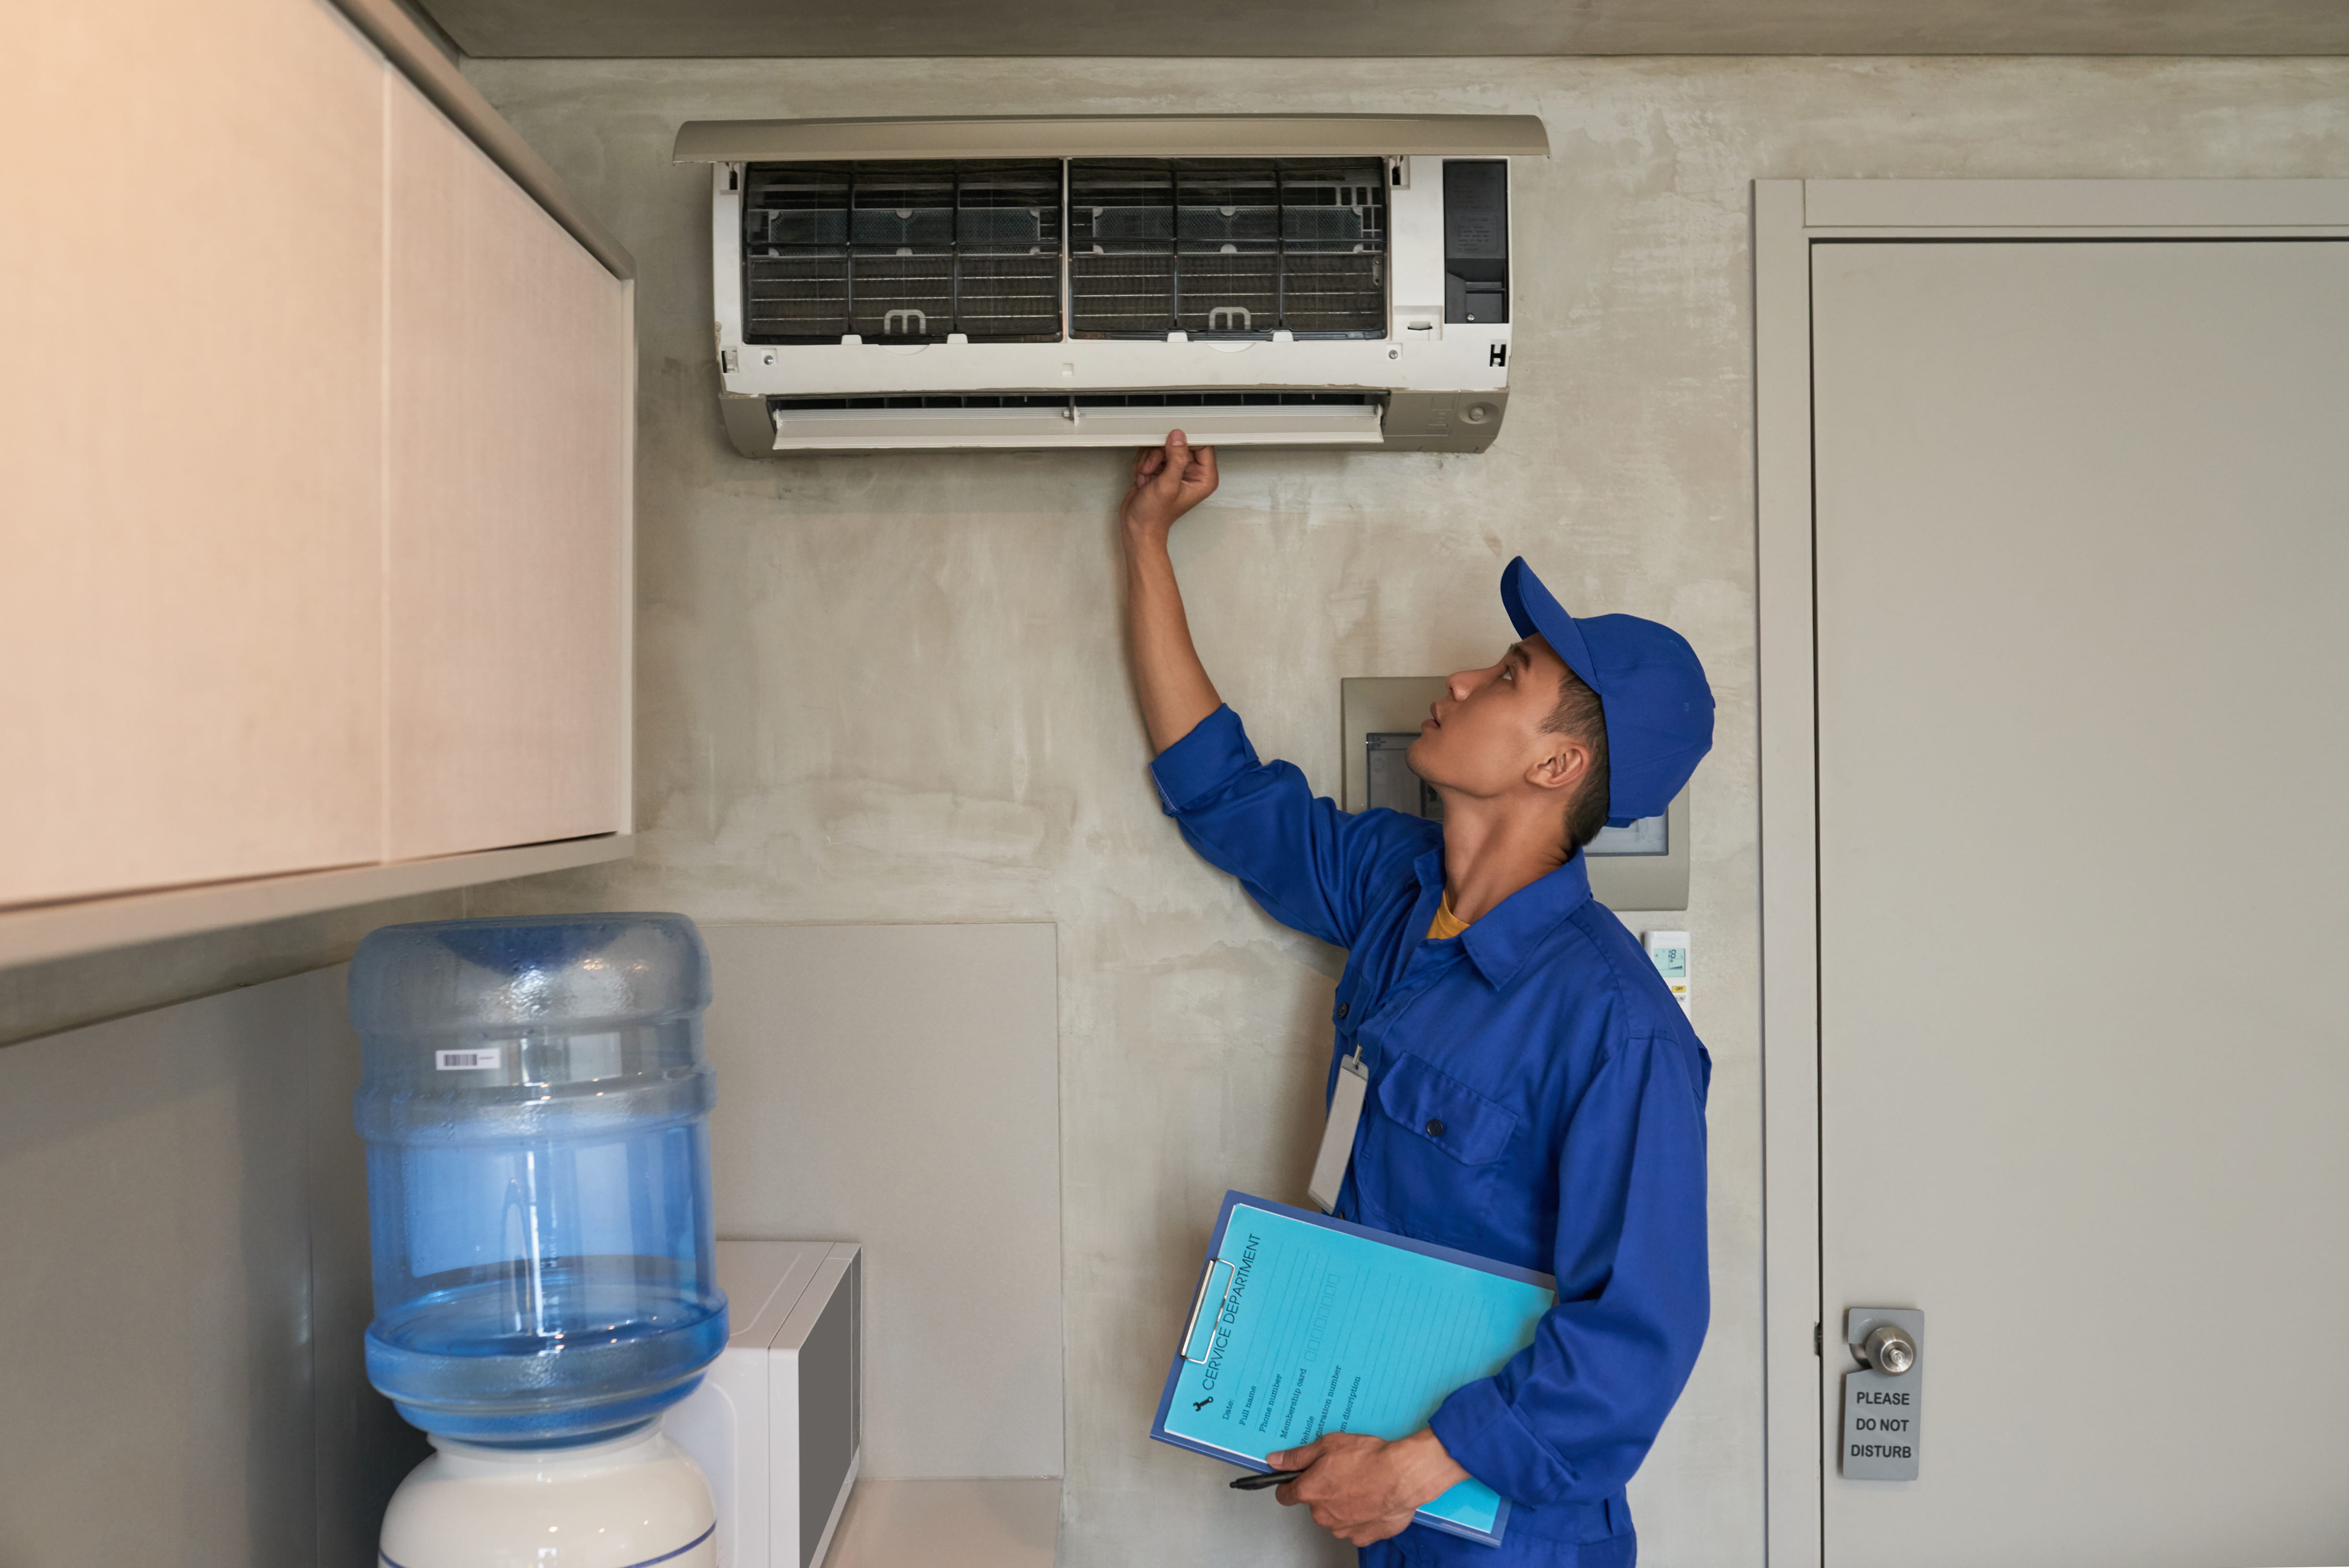 Nature Cool | Best Aircon Installation Company in Singapore 